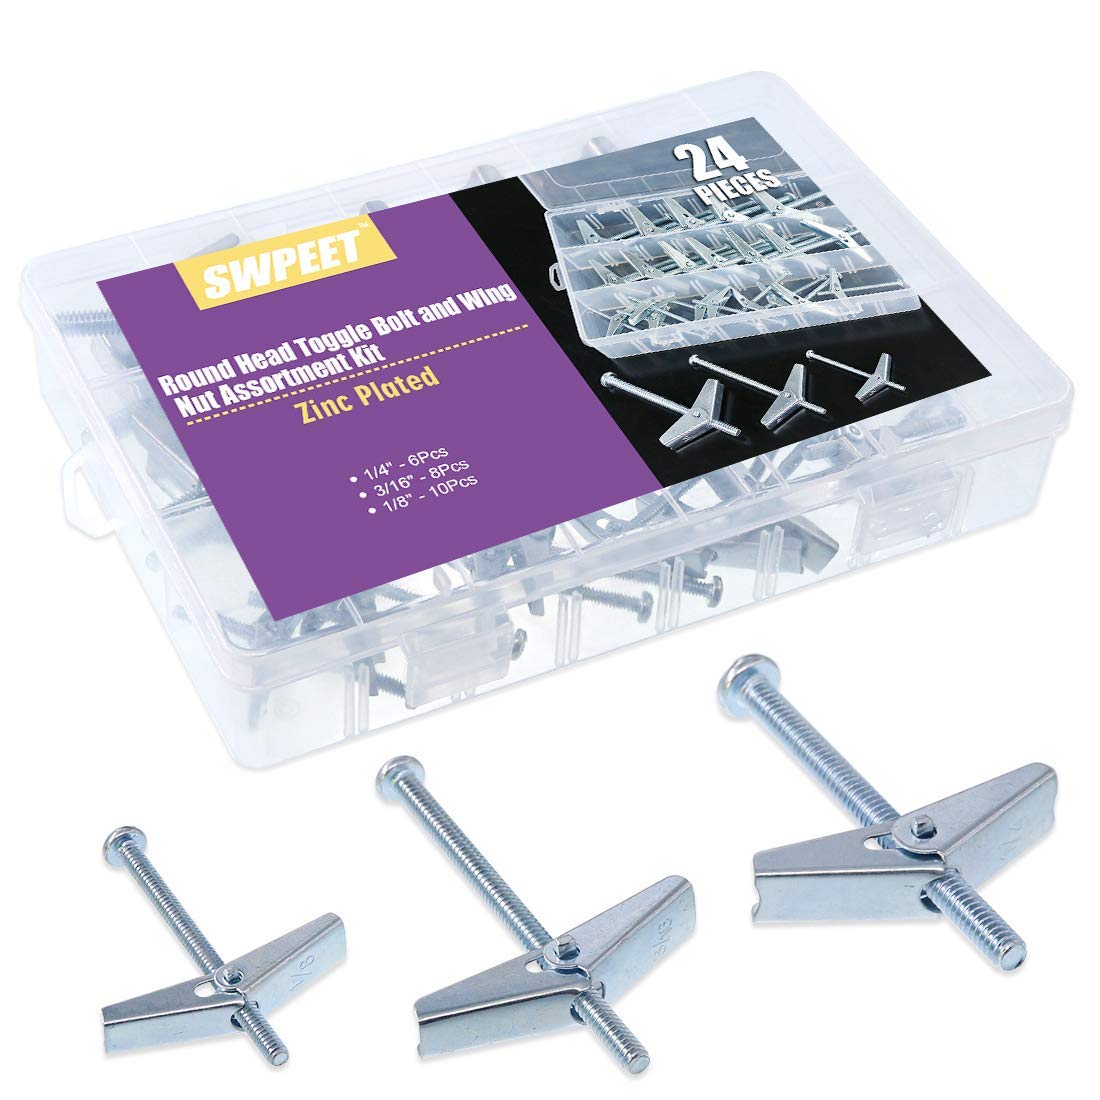 Swpeet Assorted 24 Pcs Toggle Bolt and Wing Nut Kit [...]